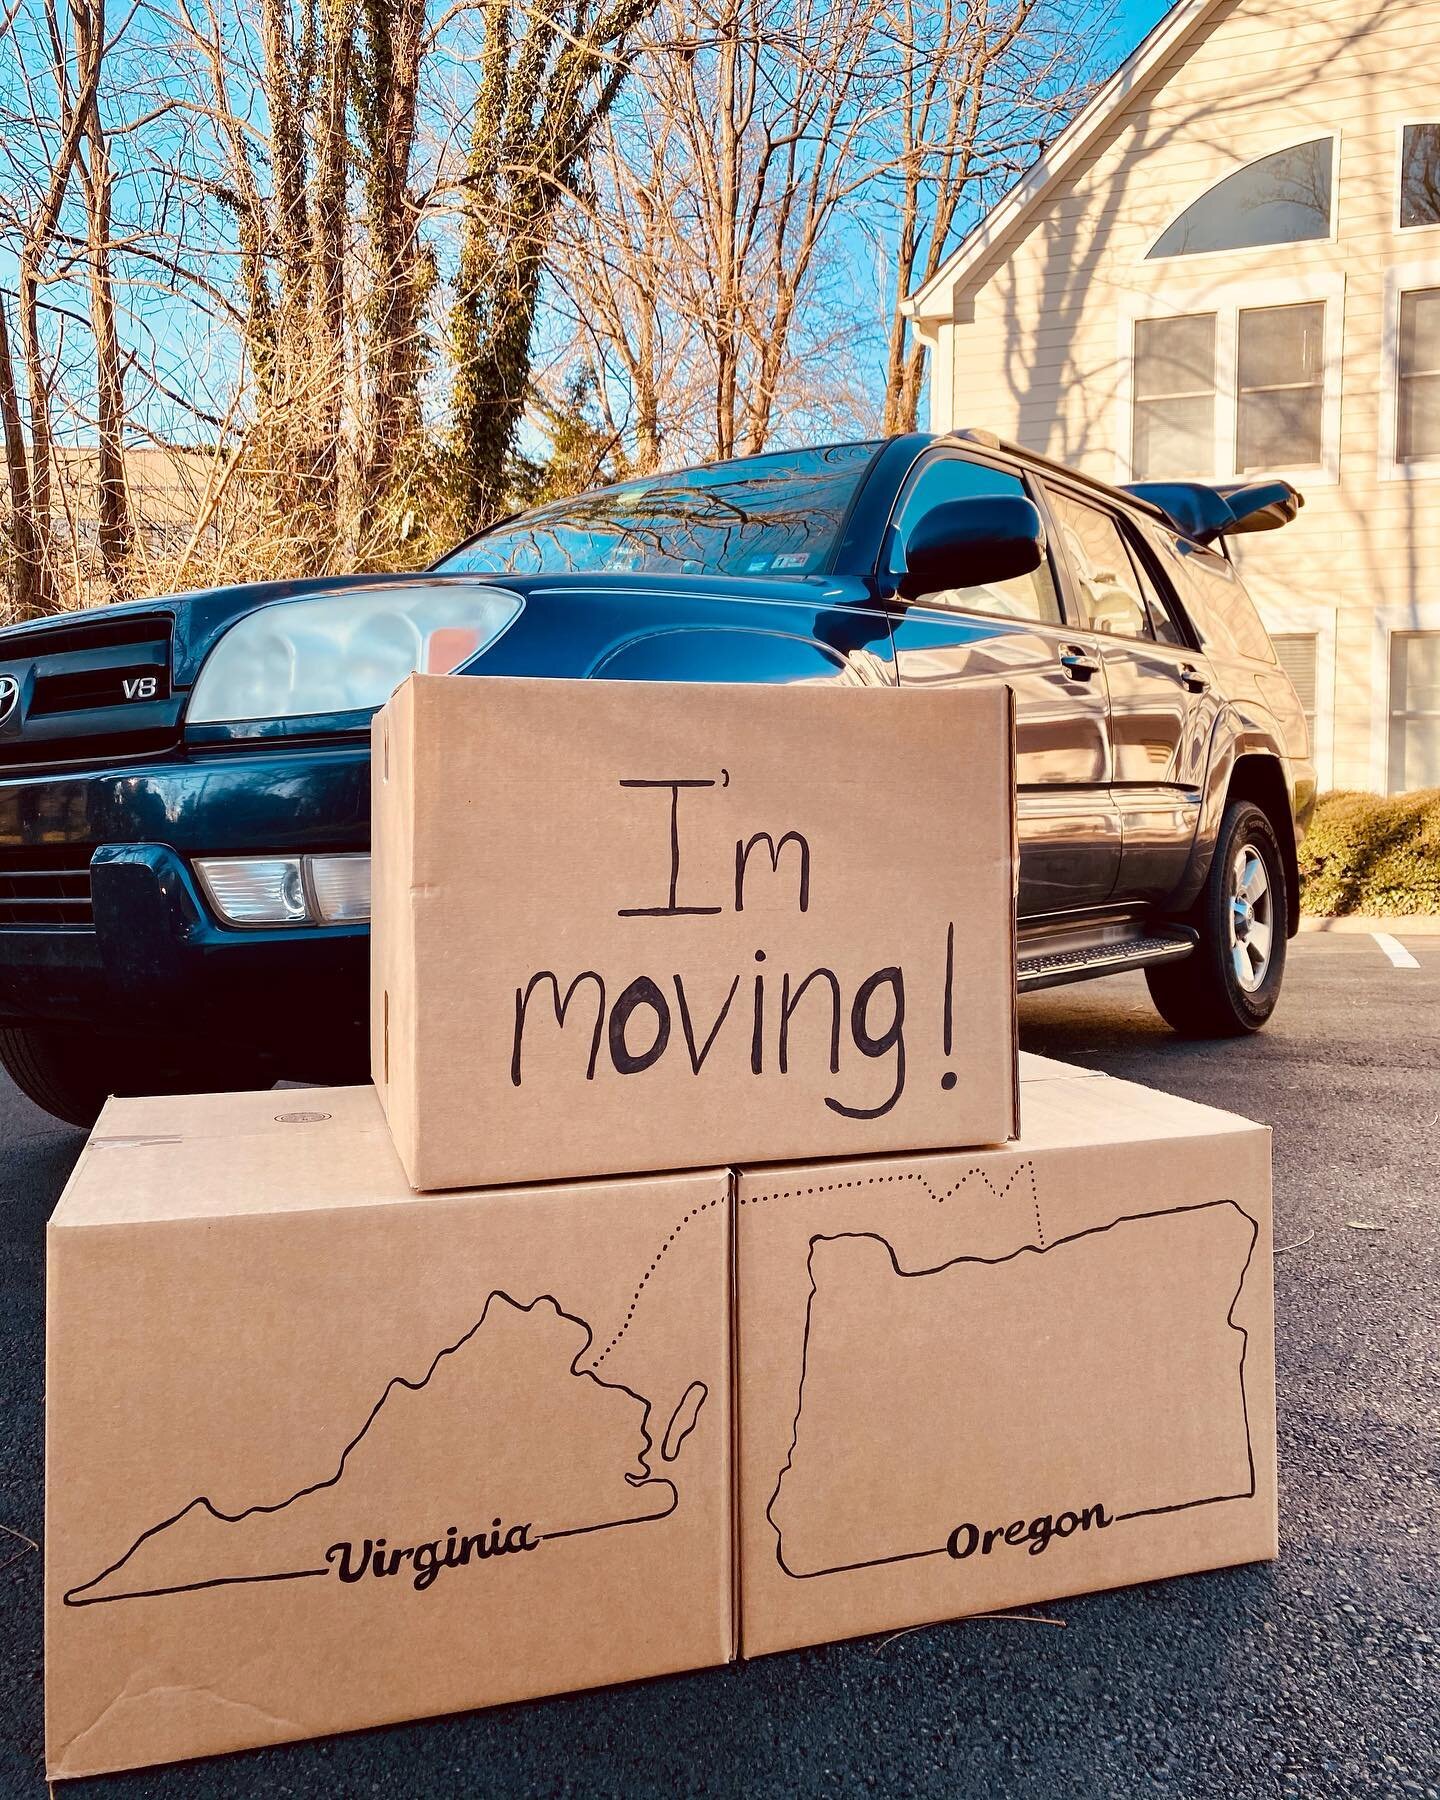 I&rsquo;M MOVING TO THE WEST COAST! On January 2nd, I begin the multi-day cross country drive with all my stuff, 2700 miles, to Bend, Oregon. ⚡️🚚
⠀
The decision to move across the country has not come easy, and the thought of leaving Northern Virgin